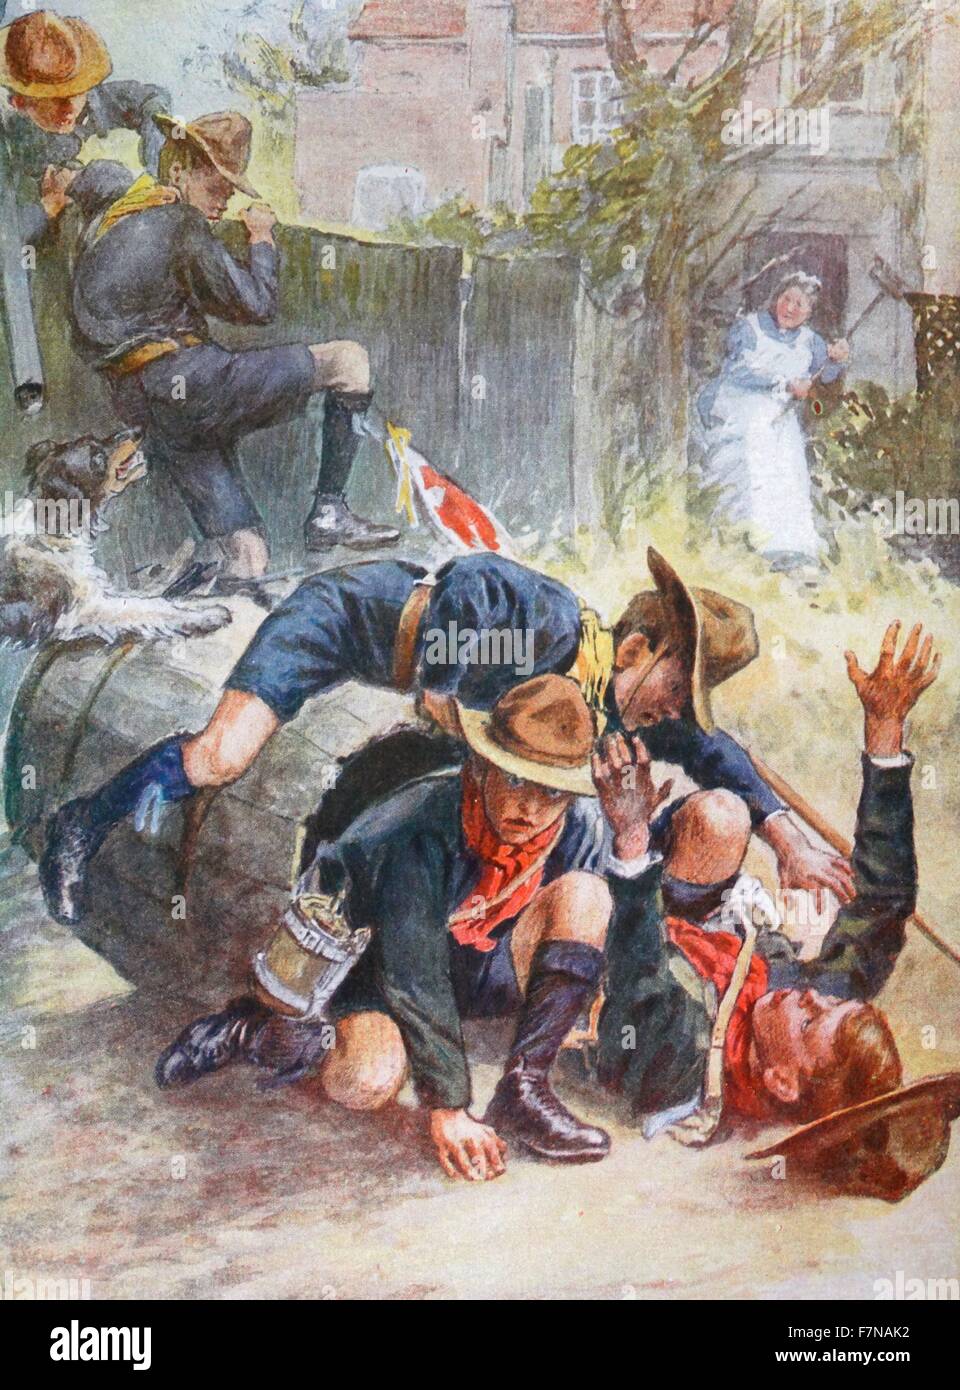 Colour illustration from a book depicting boy scouts misbehaving. Dated 1913 Stock Photo